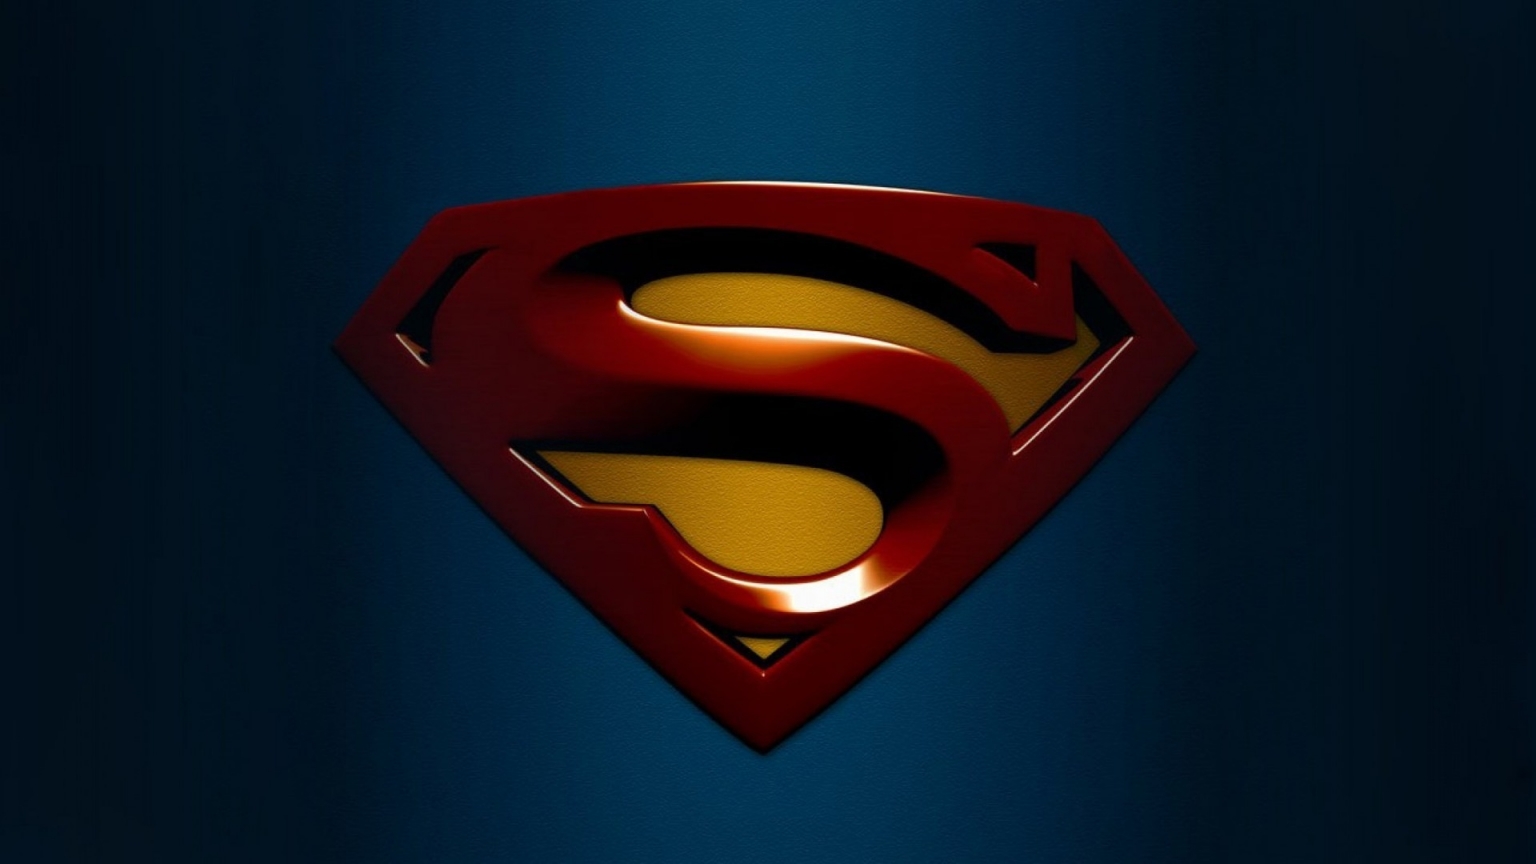 Just Superman for 1536 x 864 HDTV resolution